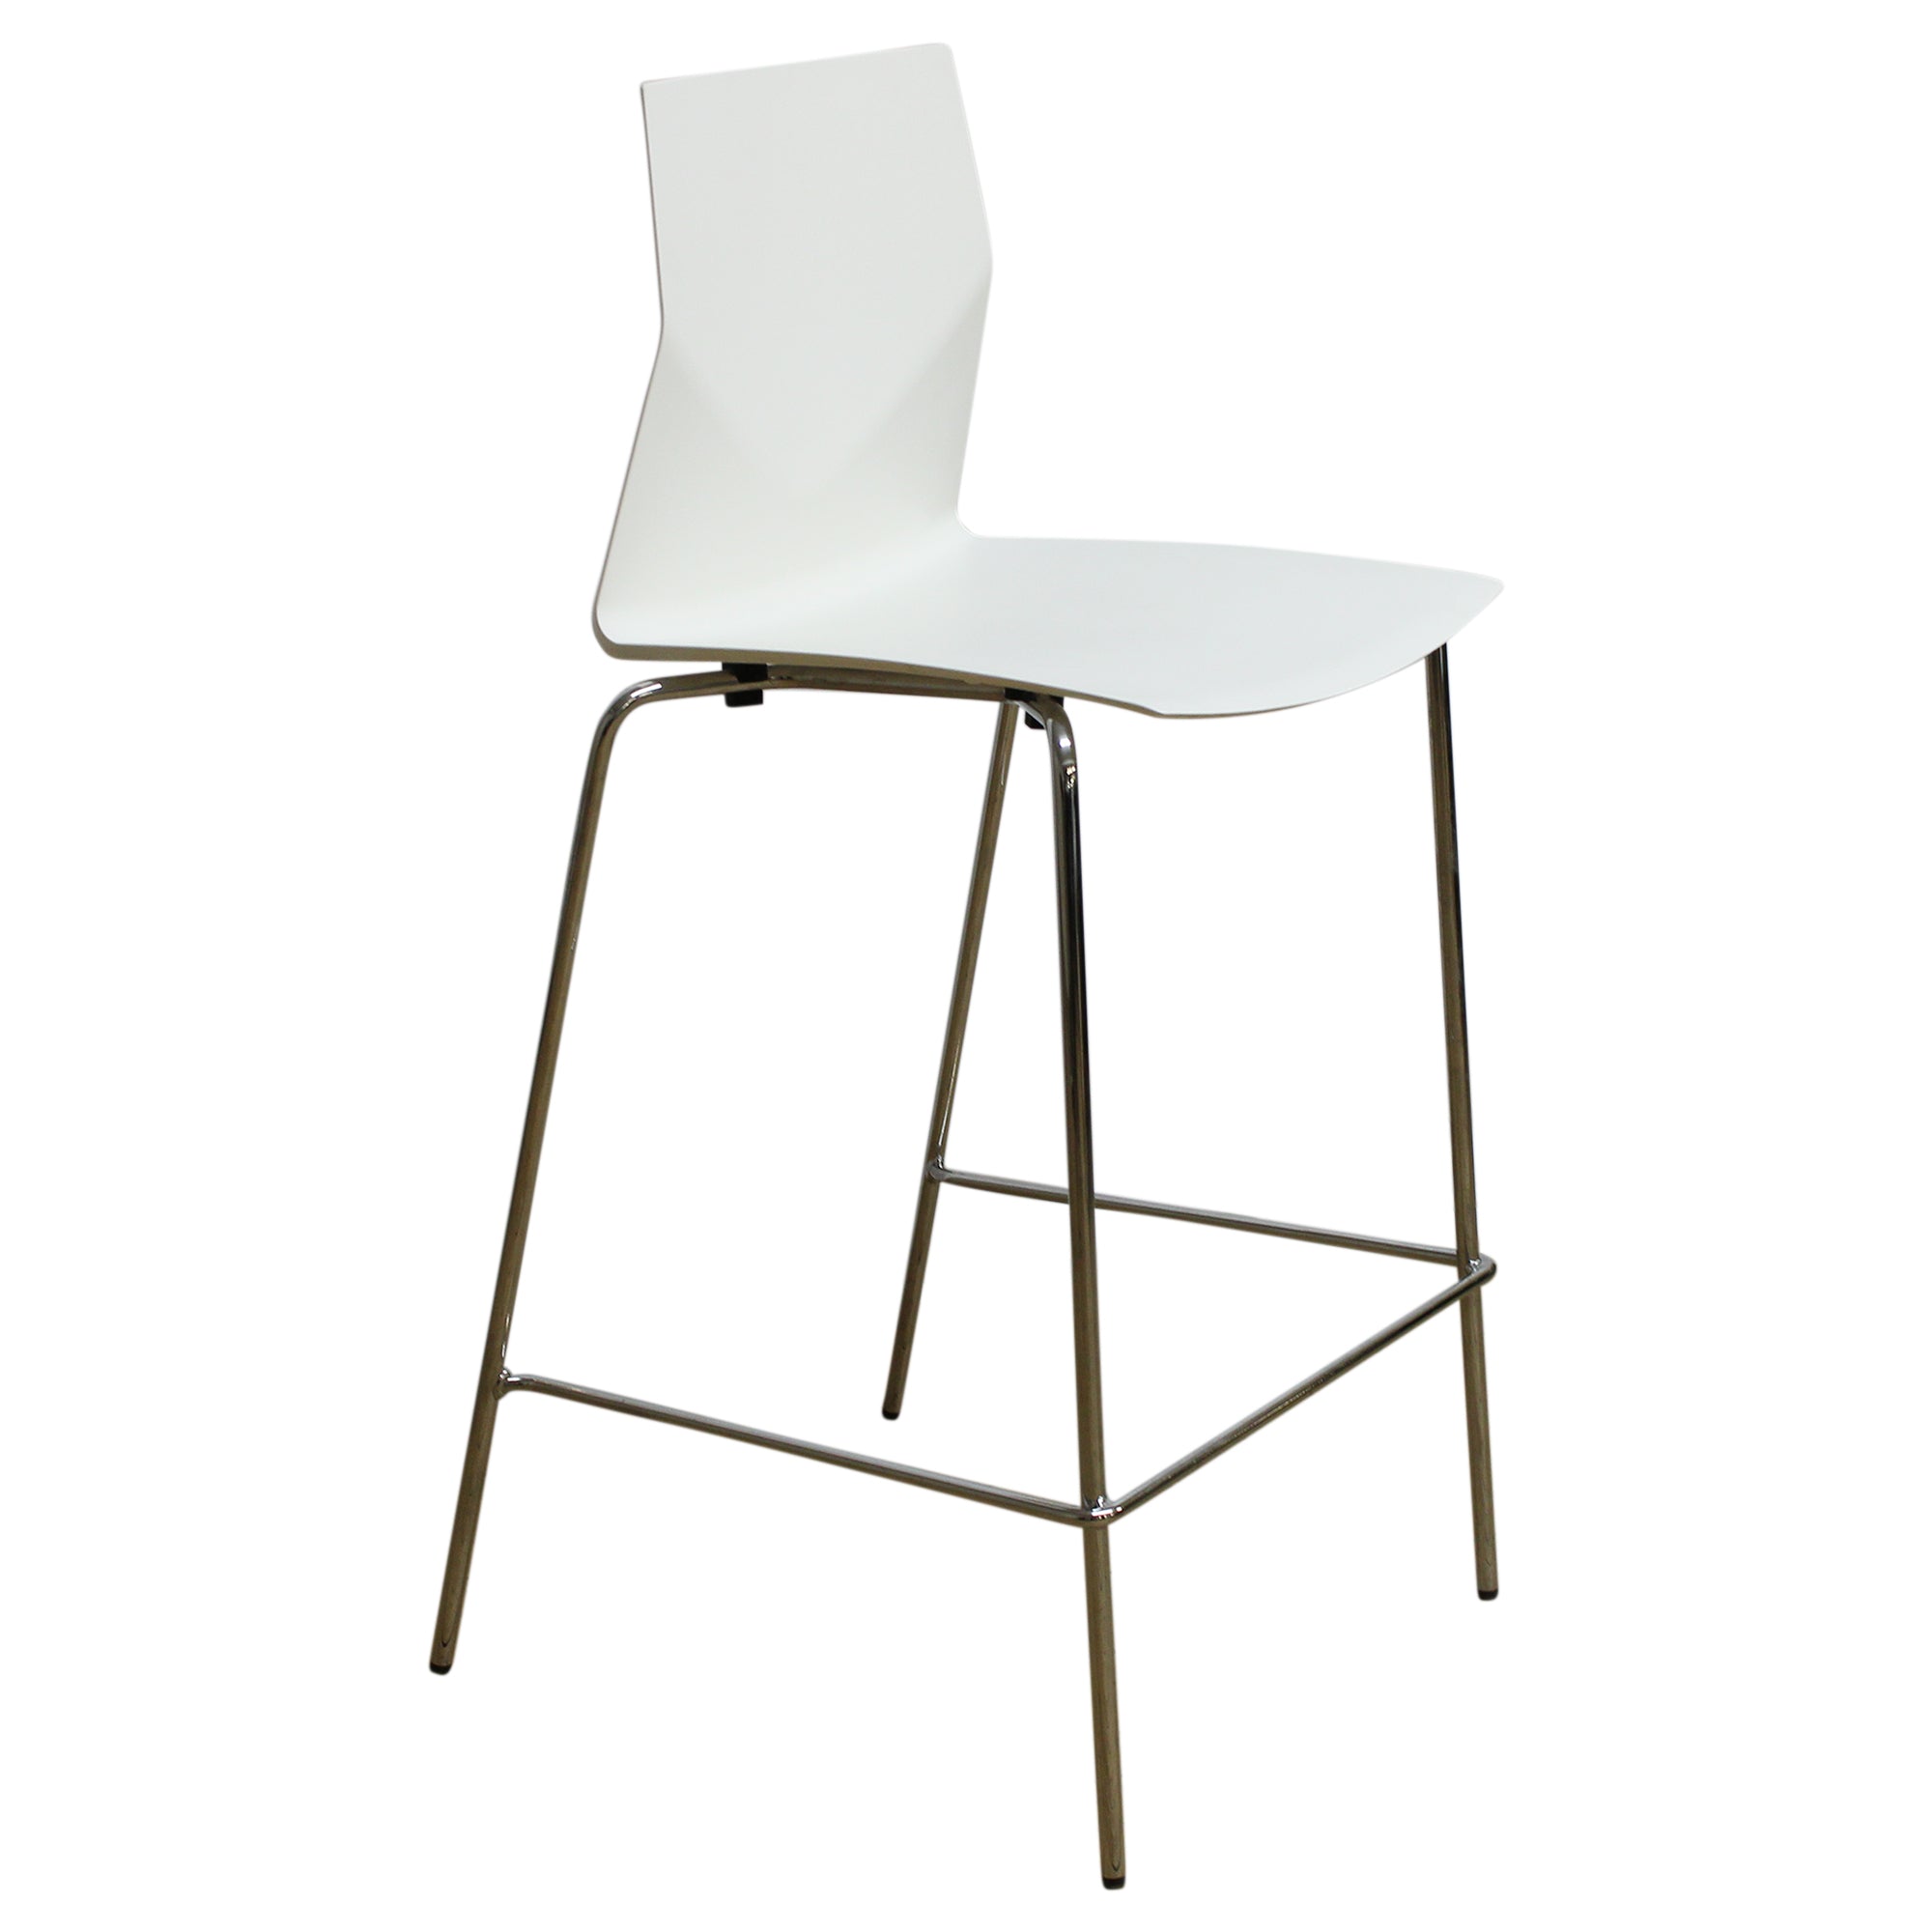 Hightower Fourcast Bar Height Stool, White - Preowned